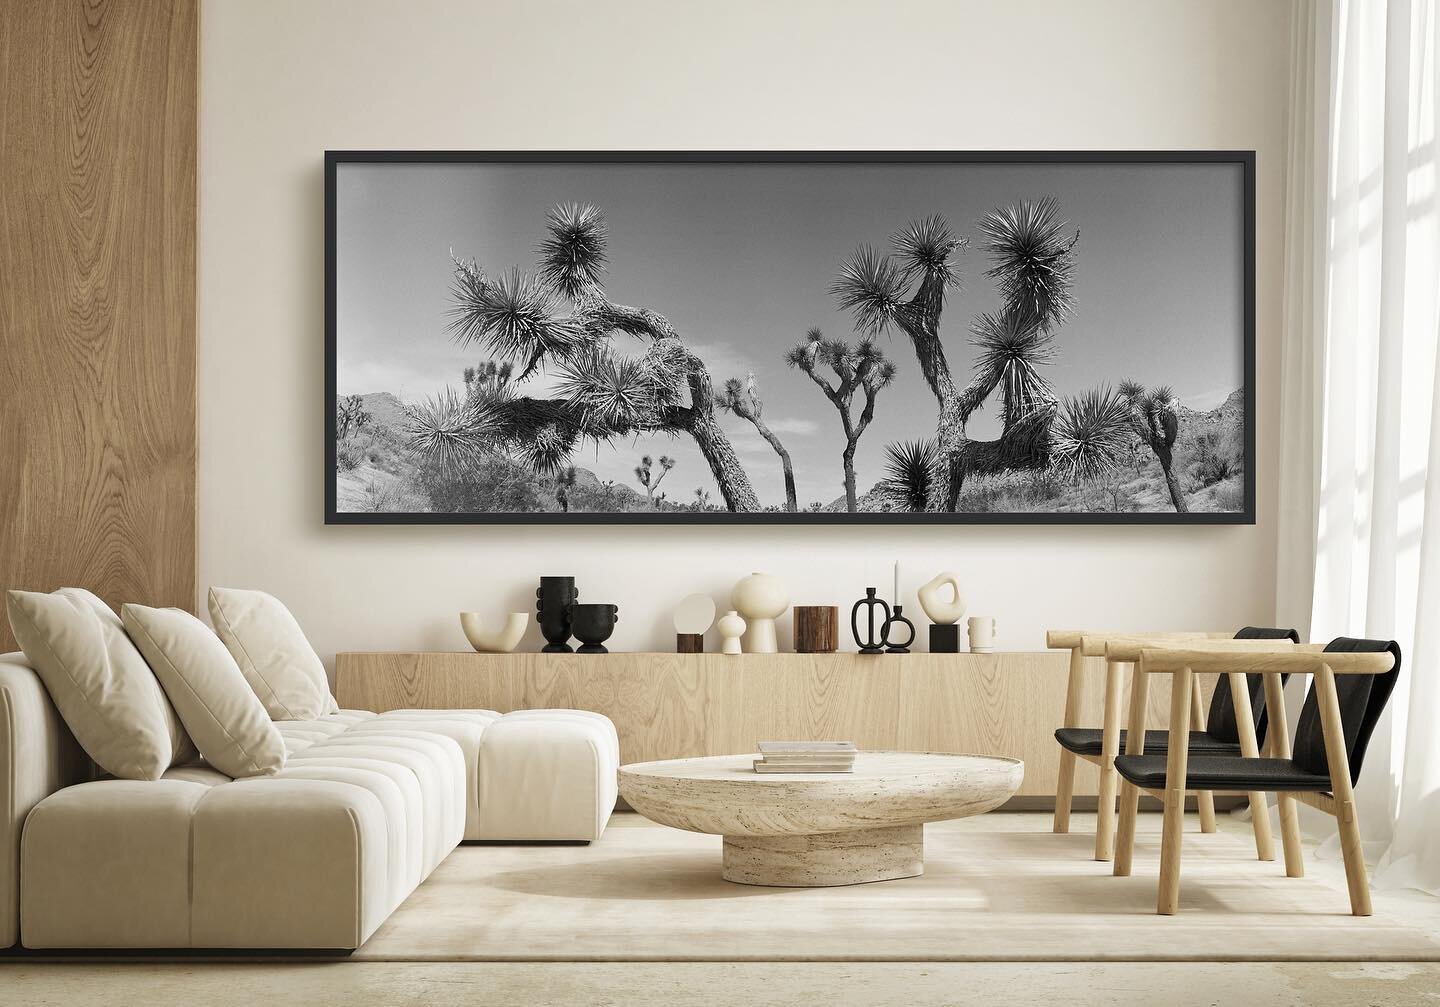 Joshua Tree No. 1 | Photograph by Renee Torres

 
-121.5&quot; W x 42&quot; H
-Edition of 25
-Pigment print on archival paper 
- Each print included a signed Certificate of Authenticity 

If you&rsquo;d like to see the art from any of our collections